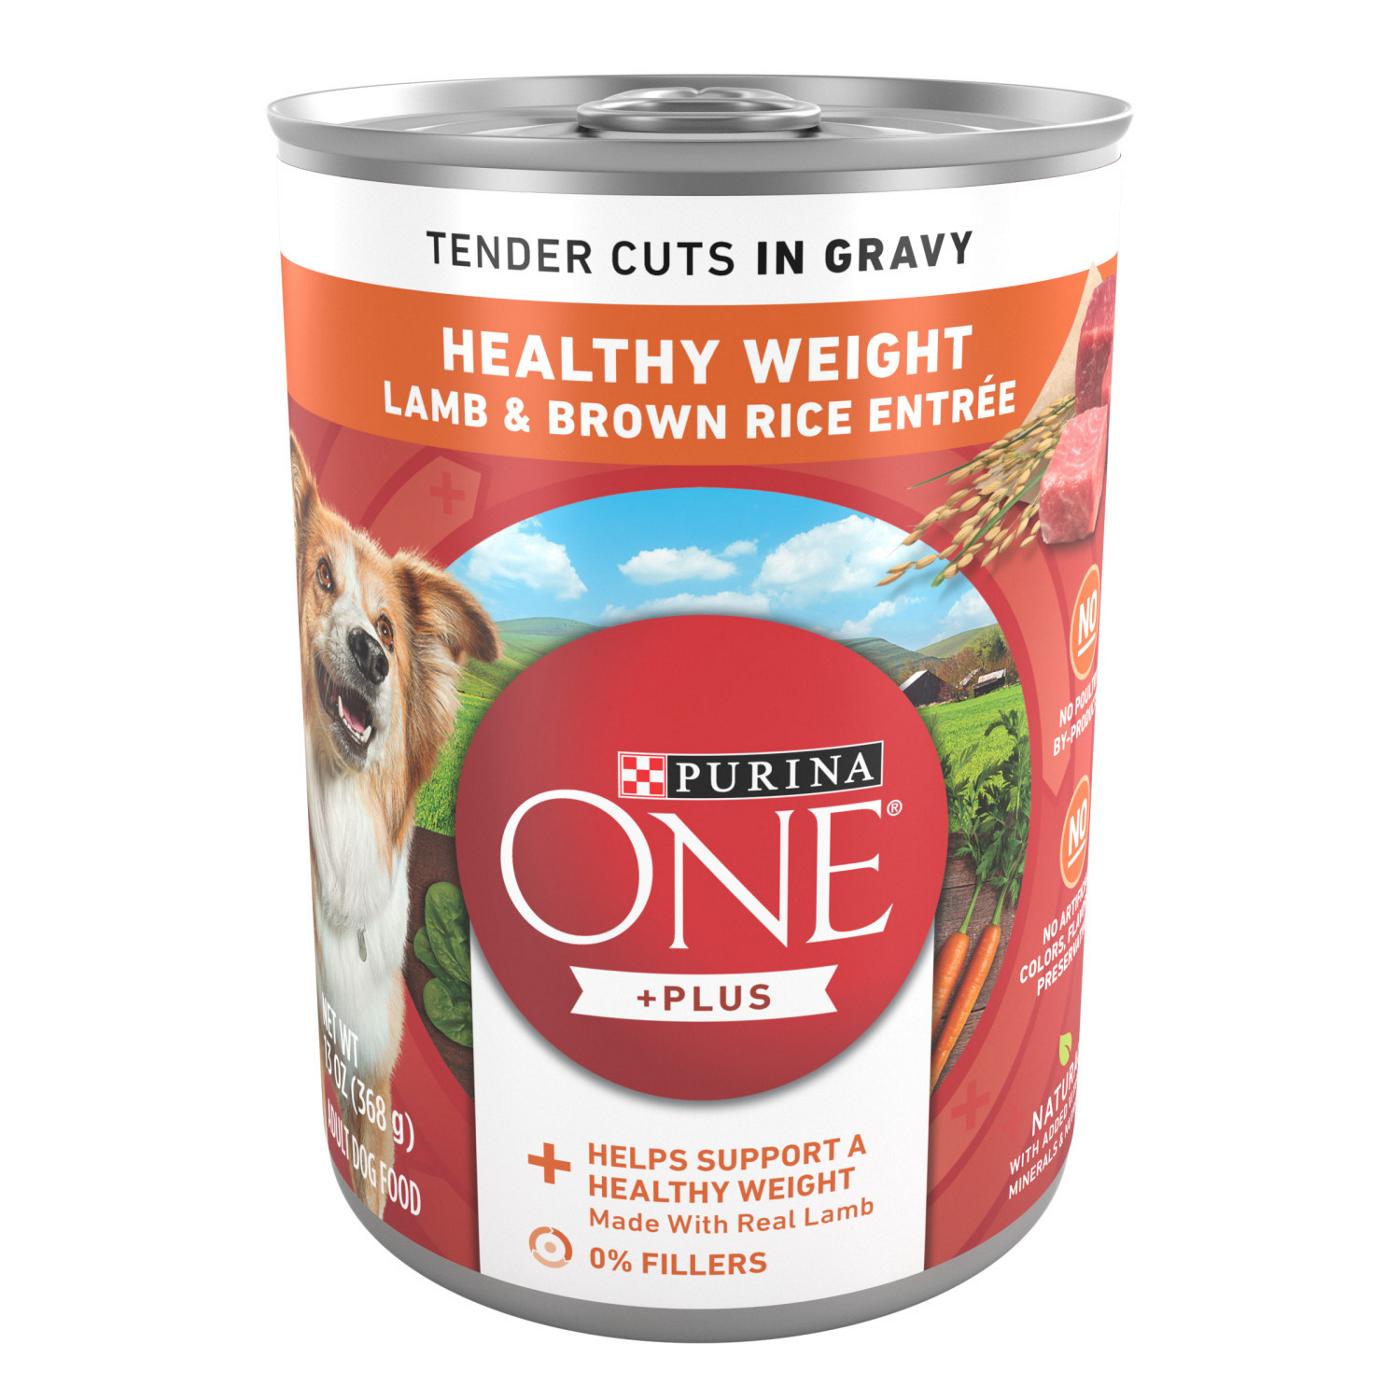 Purina One Smartblend Healthy Weight